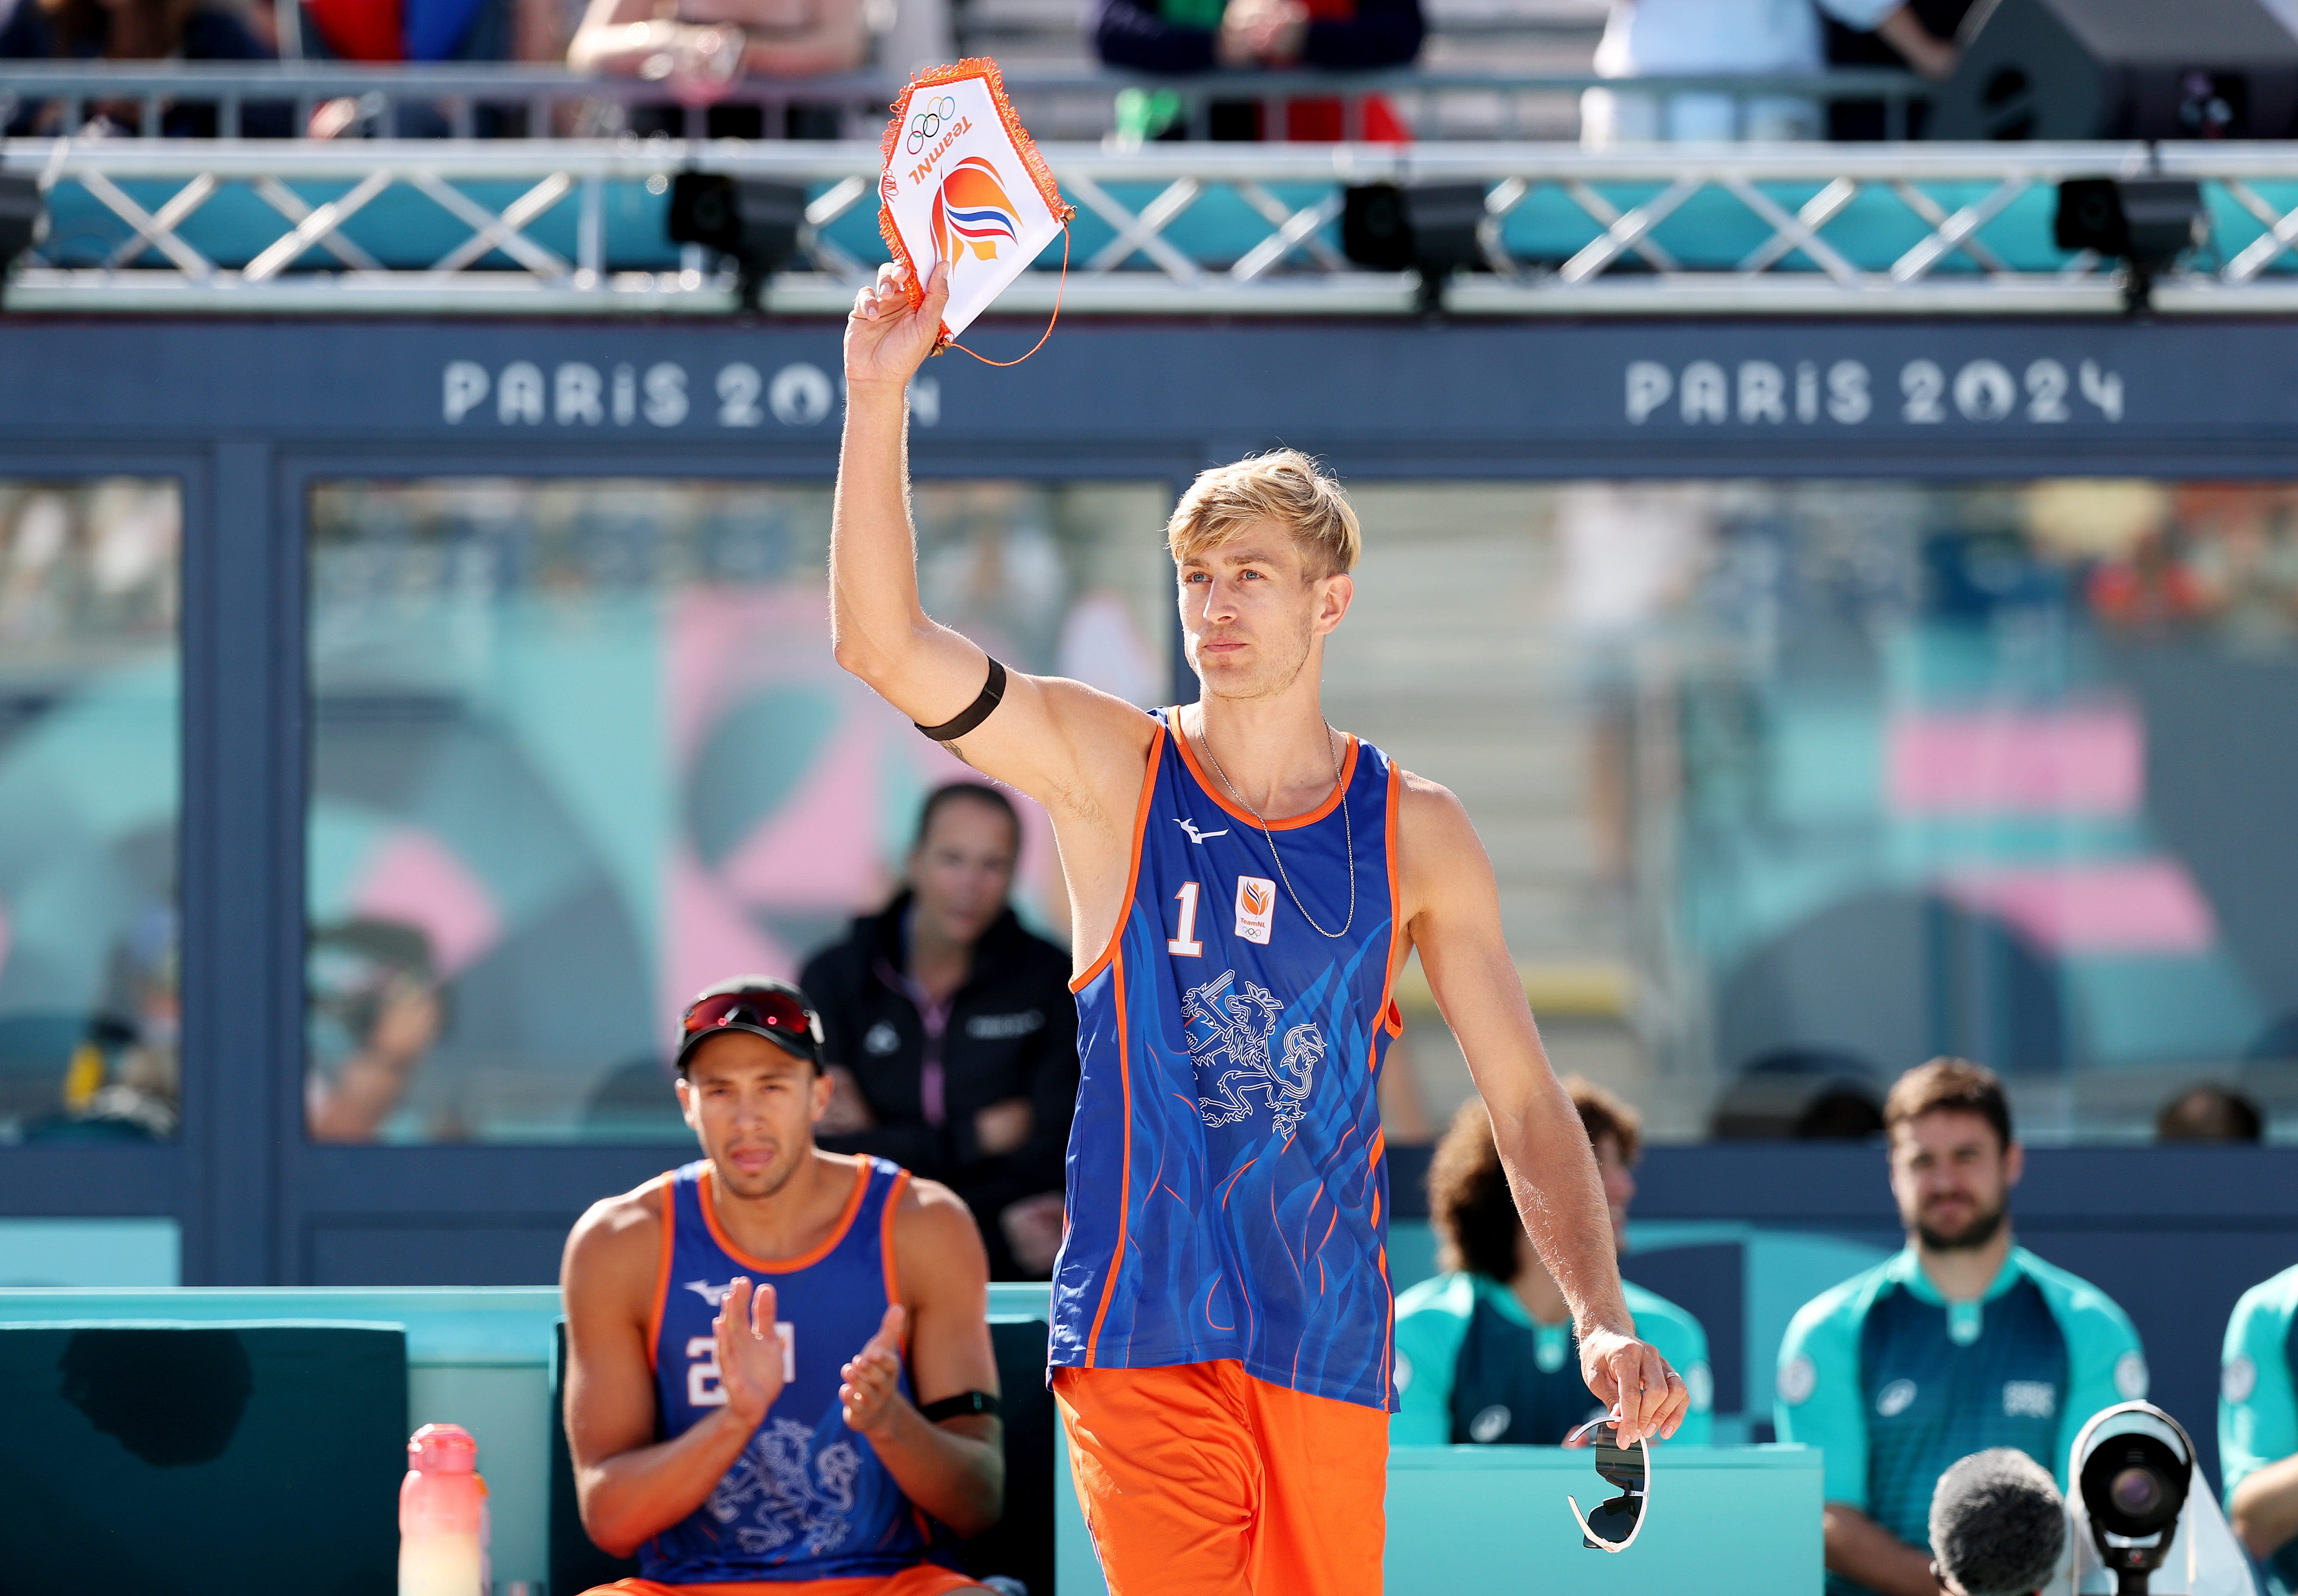 Steven van de Velde played a volleyball match Sunday, and the Paris Olympics lost